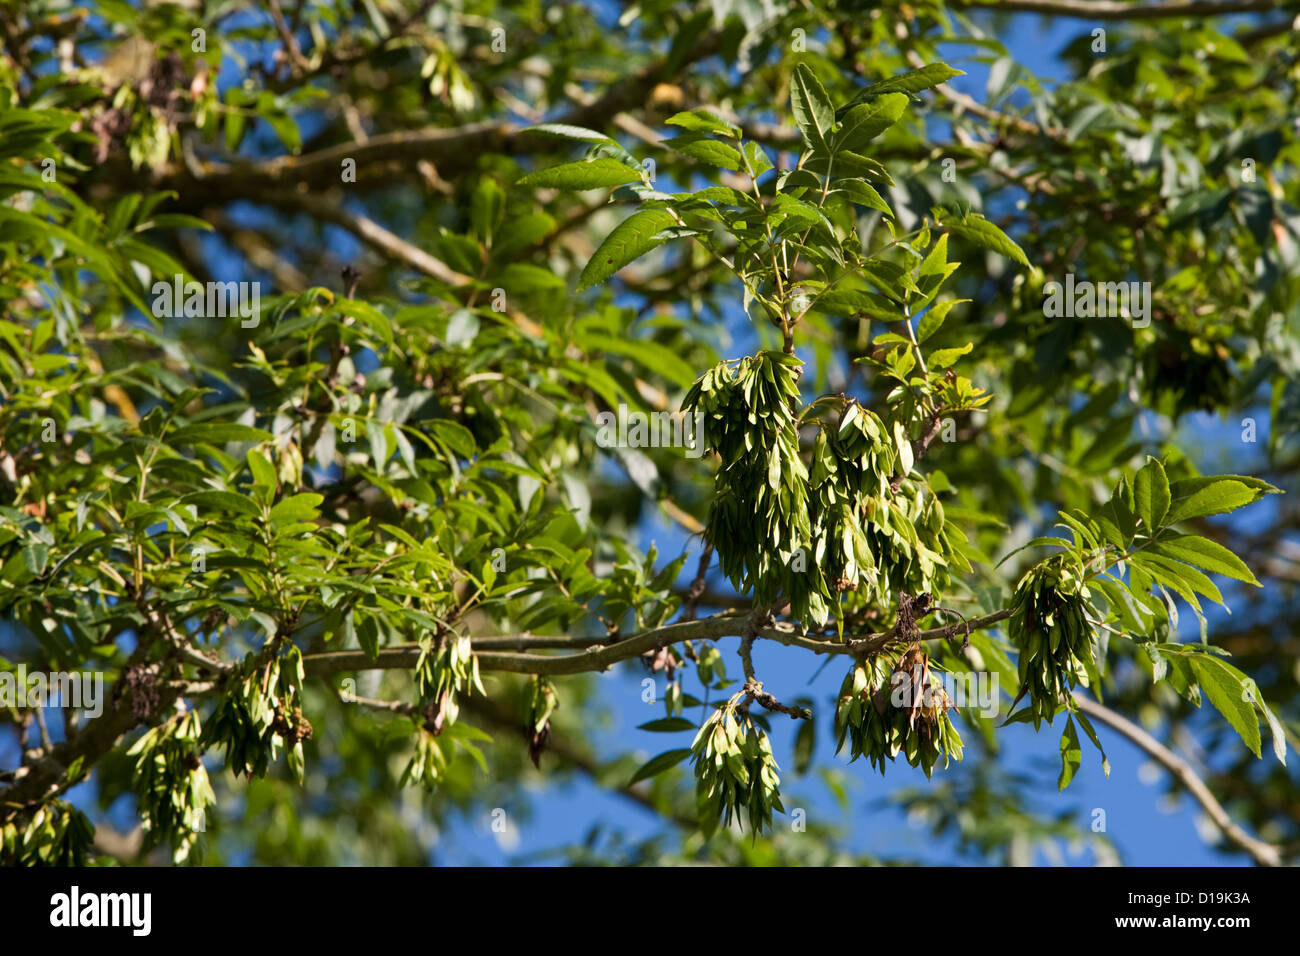 Common Ash, Fraxinus excelsior in summer foliage with keys Stock Photo